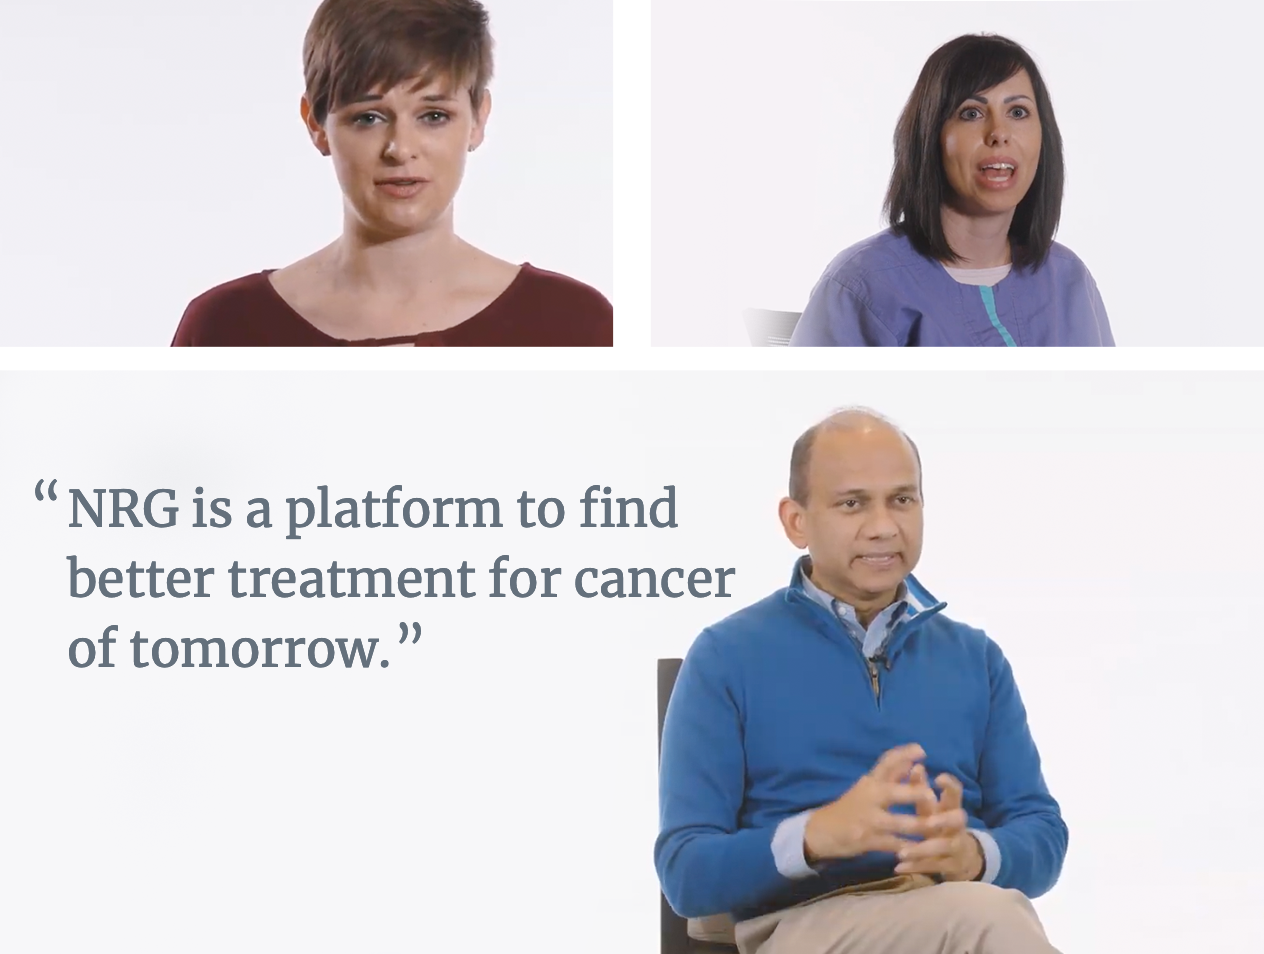 NRG is a platform to find better treatment for cancer of tomorrow.